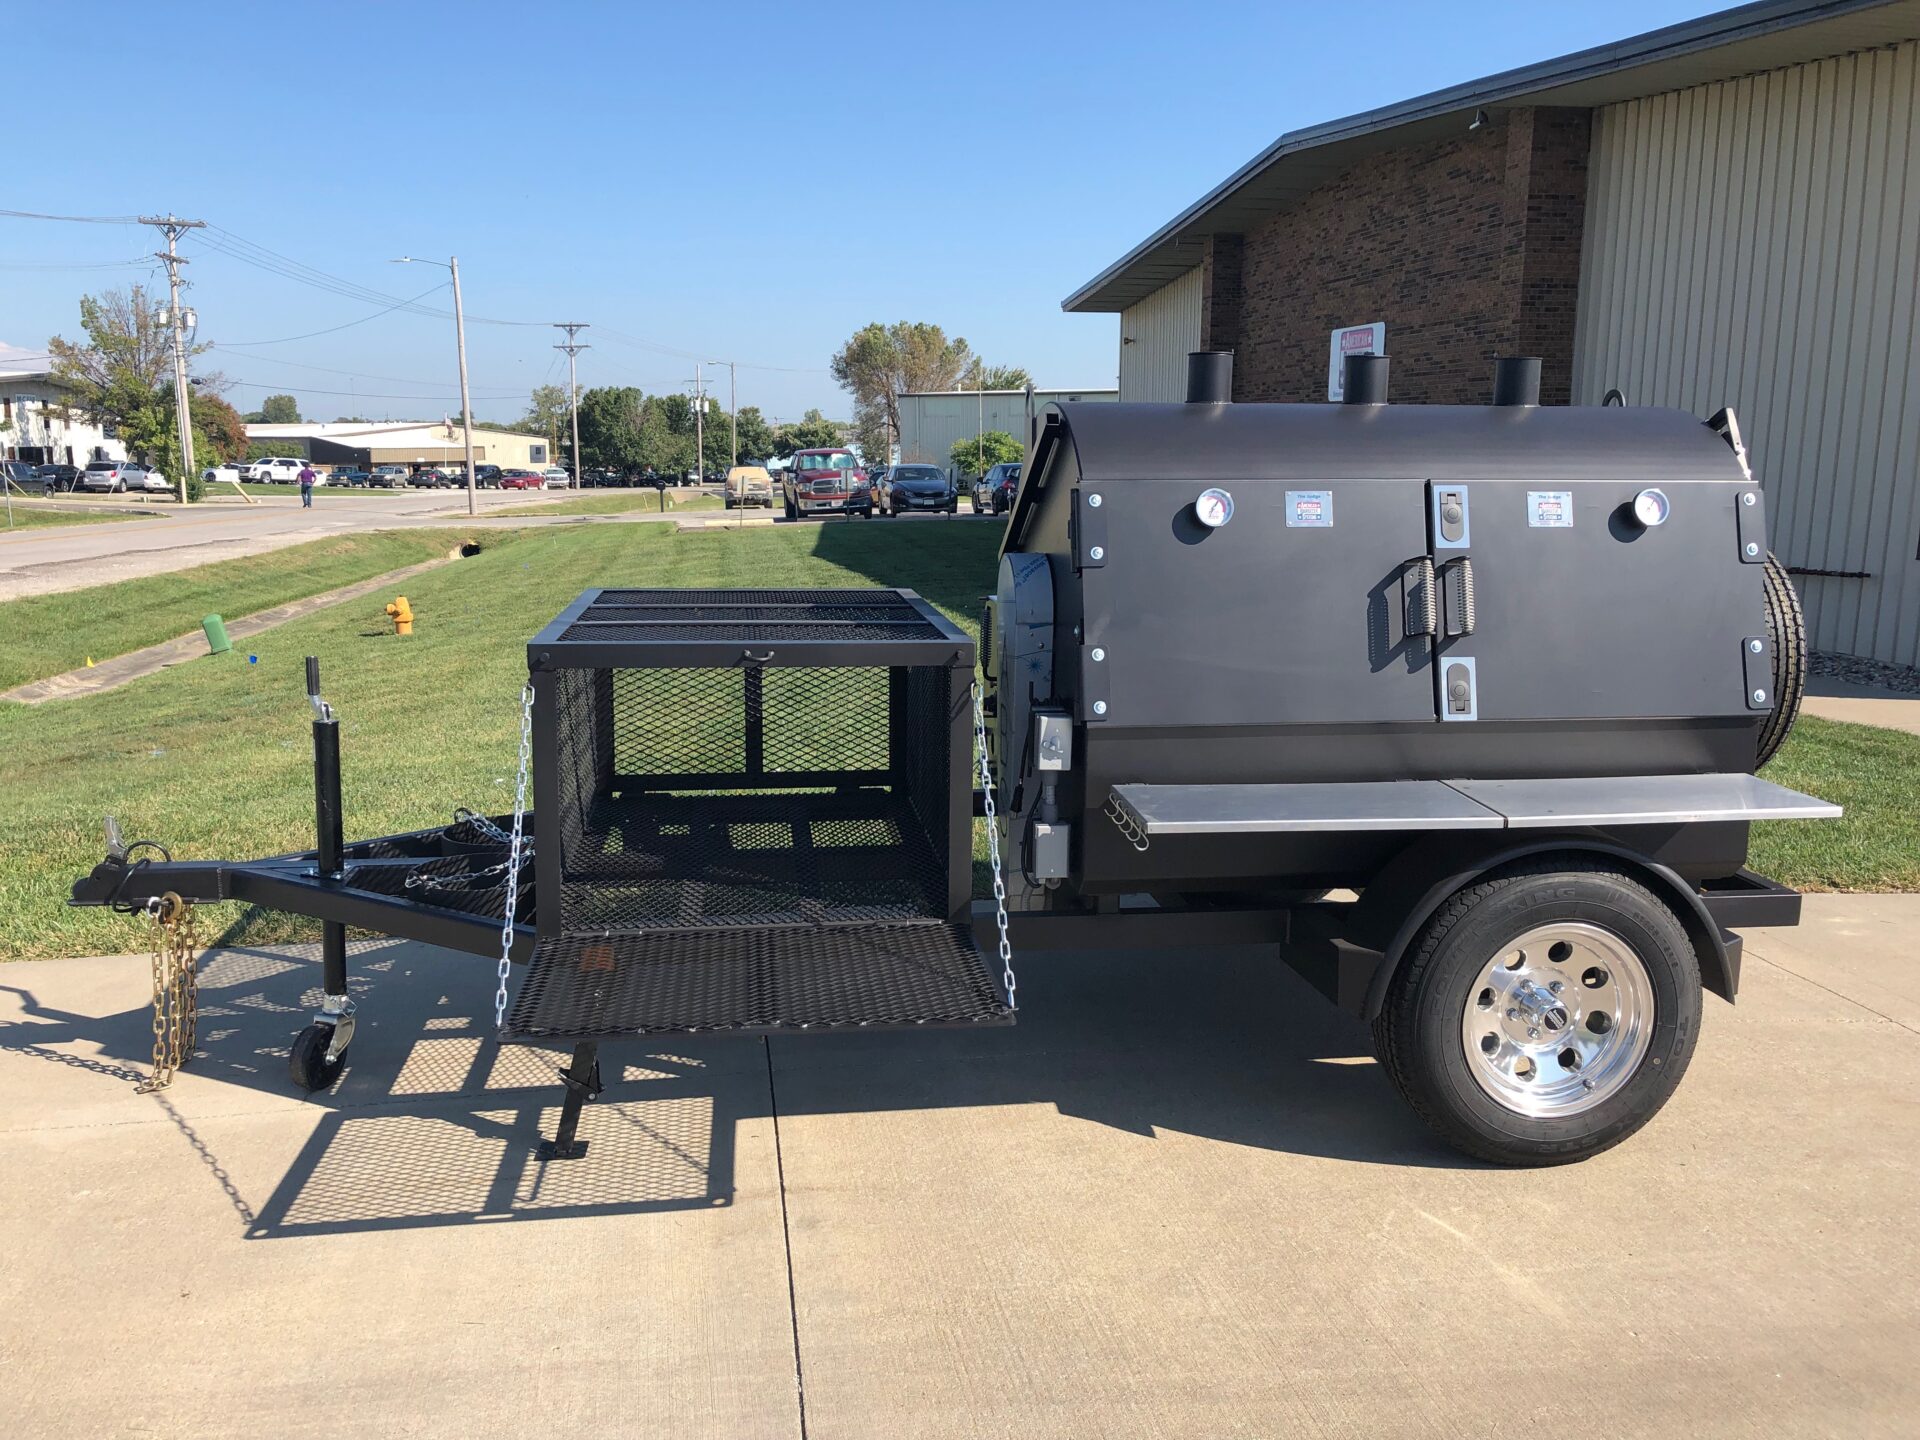 meat smoker on a trailer